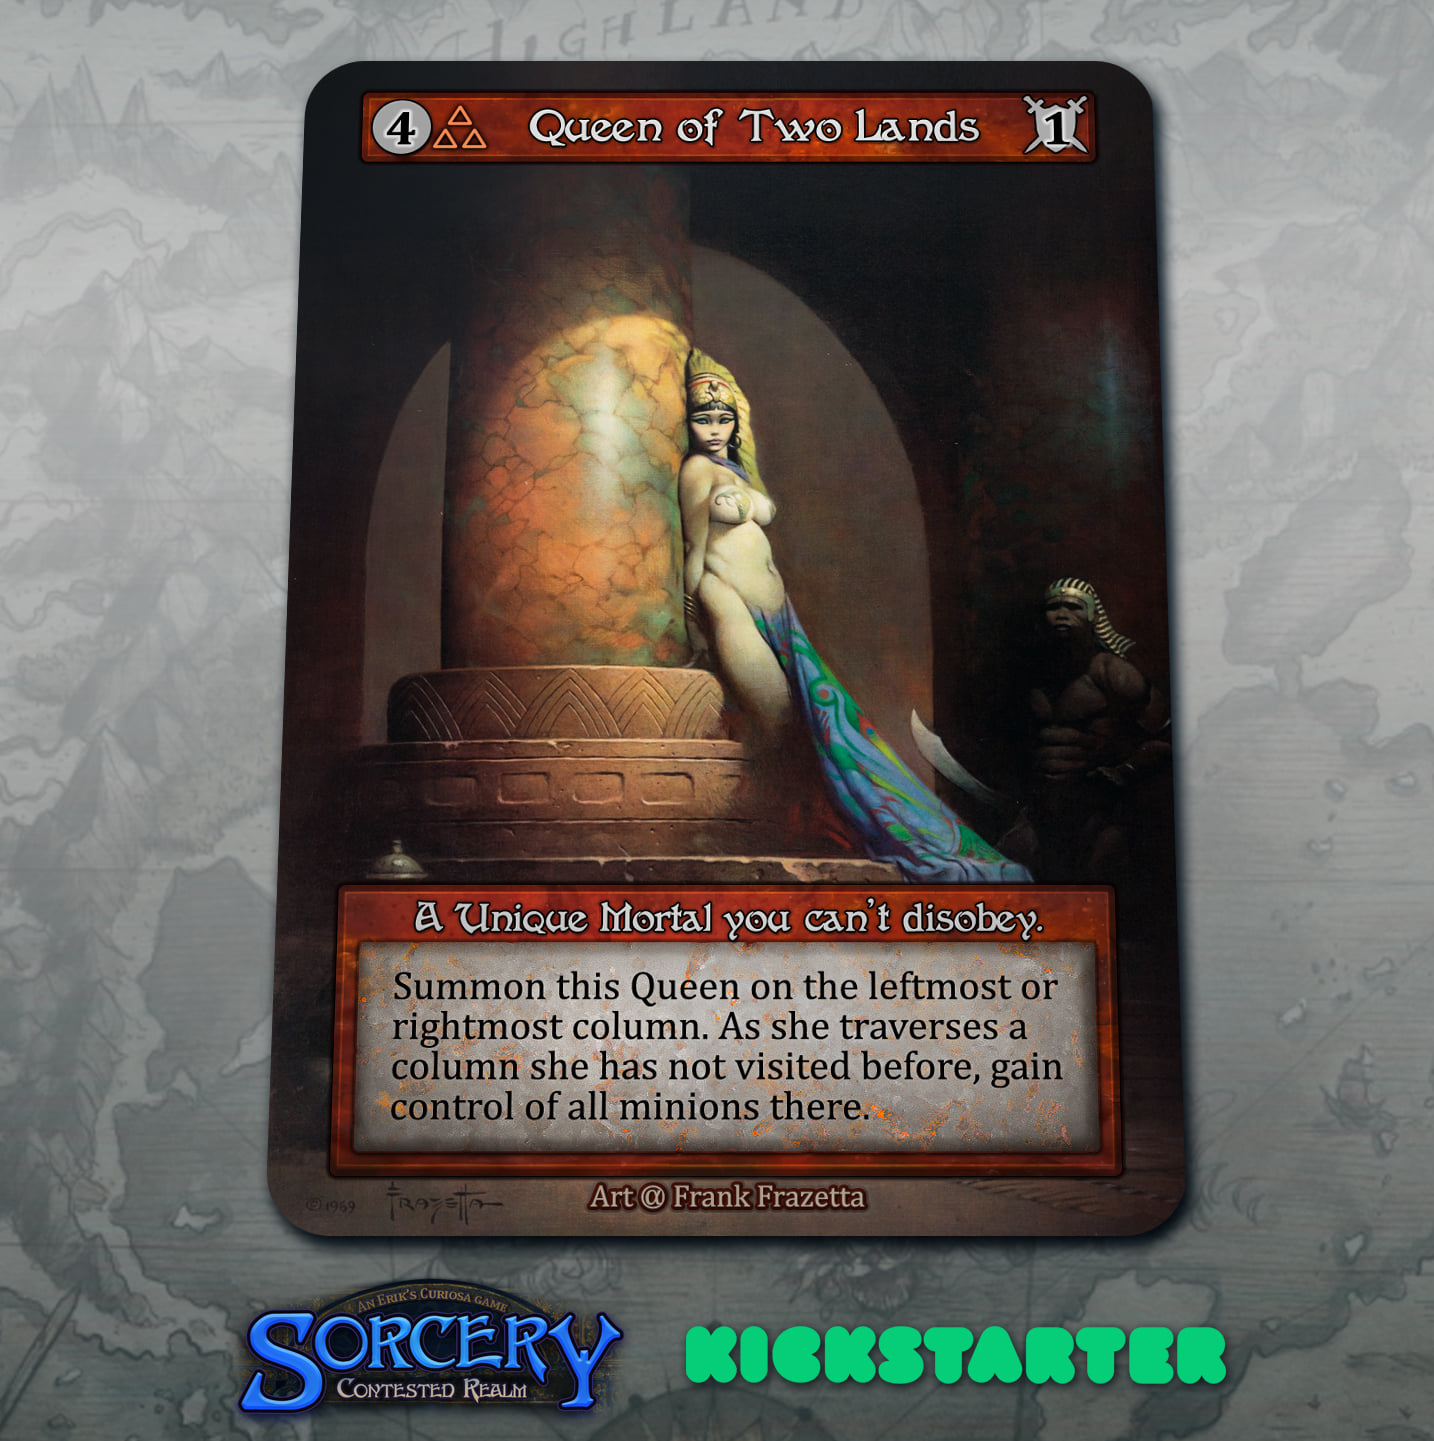 Sorcery TCG Cards Rise! Check Out Collector Arthouse